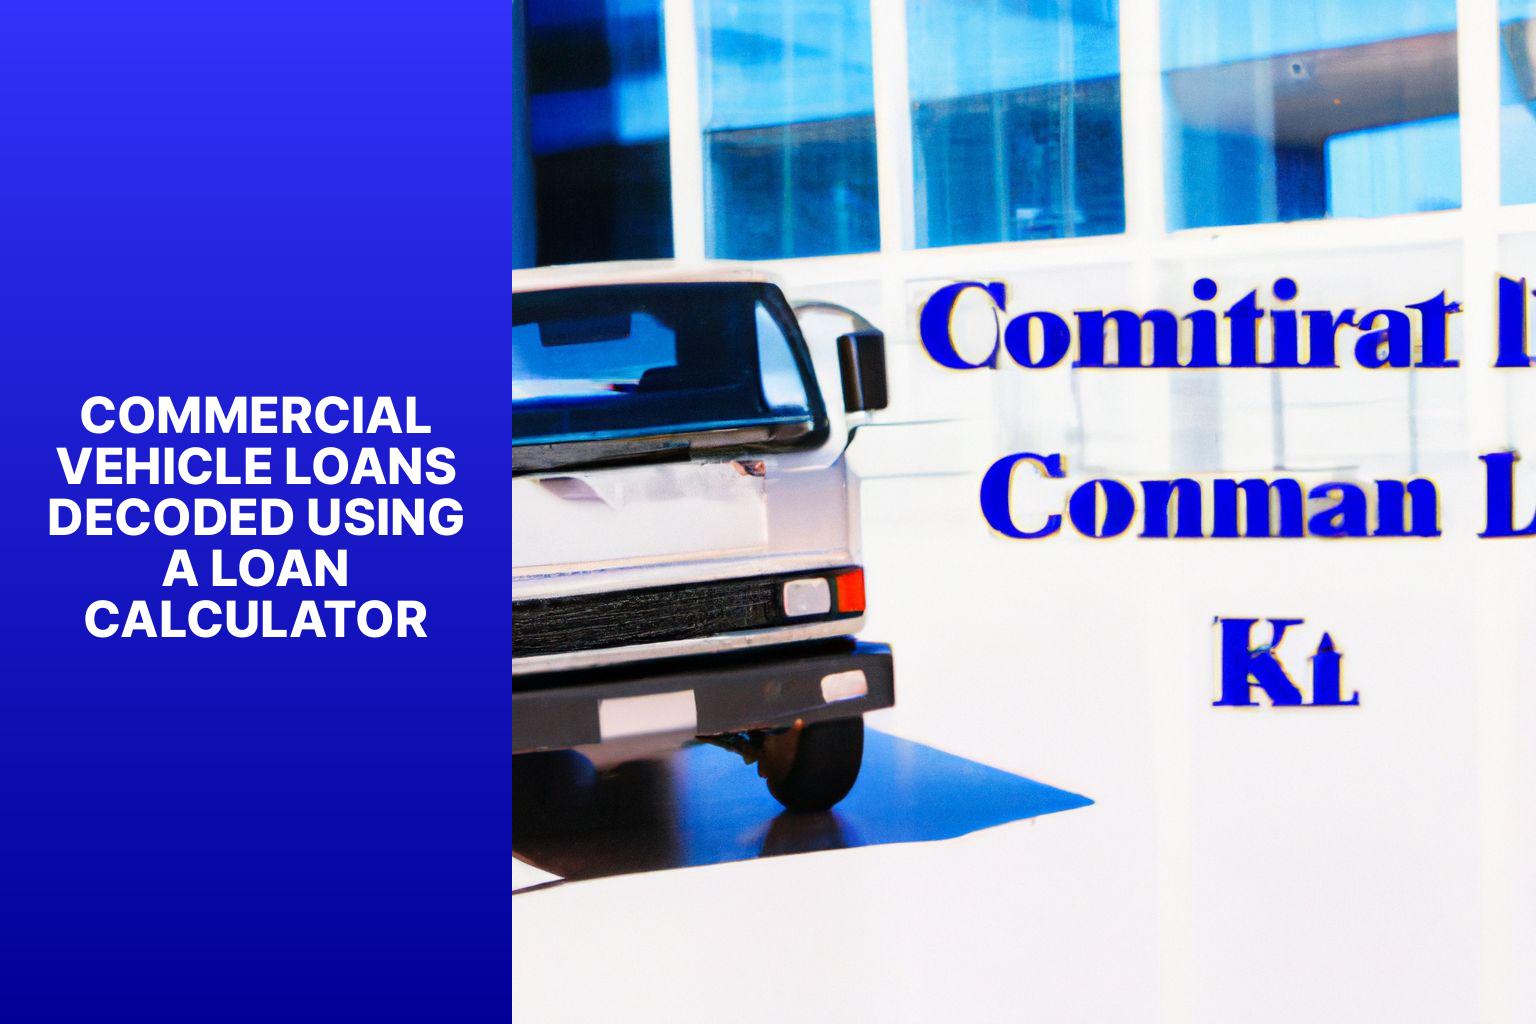 Commercial Vehicle Loans Decoded Using a Loan Calculator